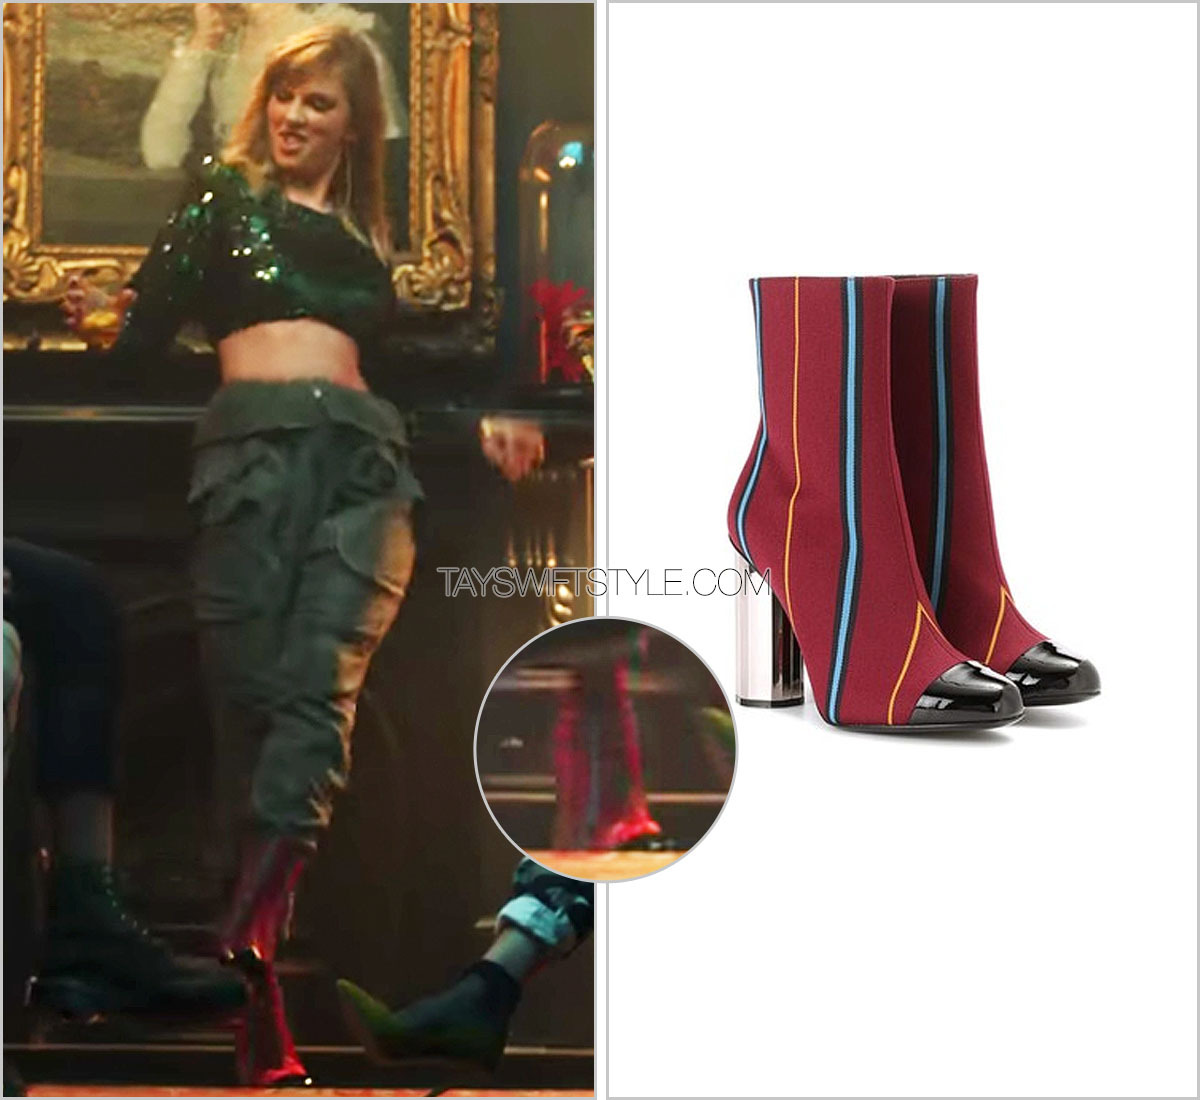 Taylor Swift's Louboutin crampon leather boots in her videoclip